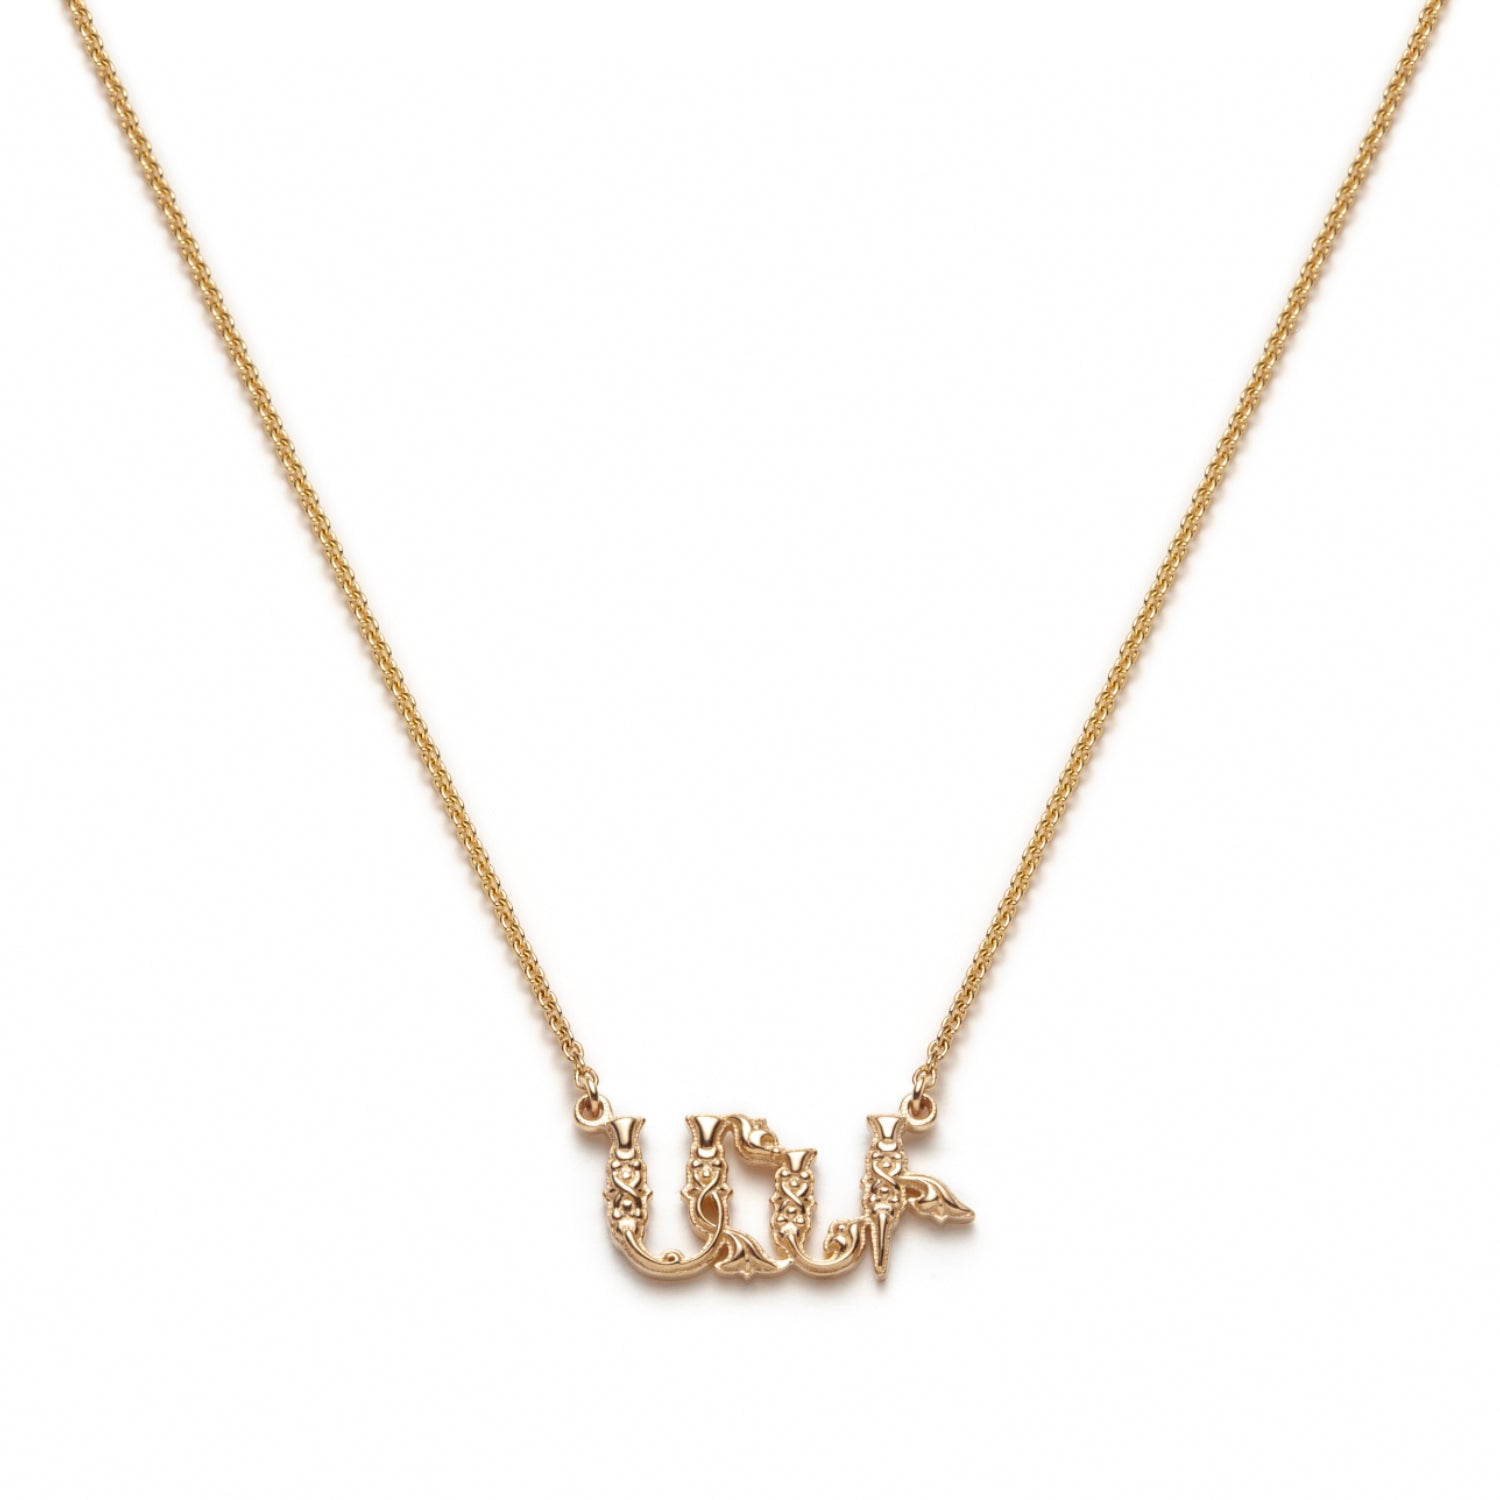 Armenian Name Necklace Ani in Yellow Gold